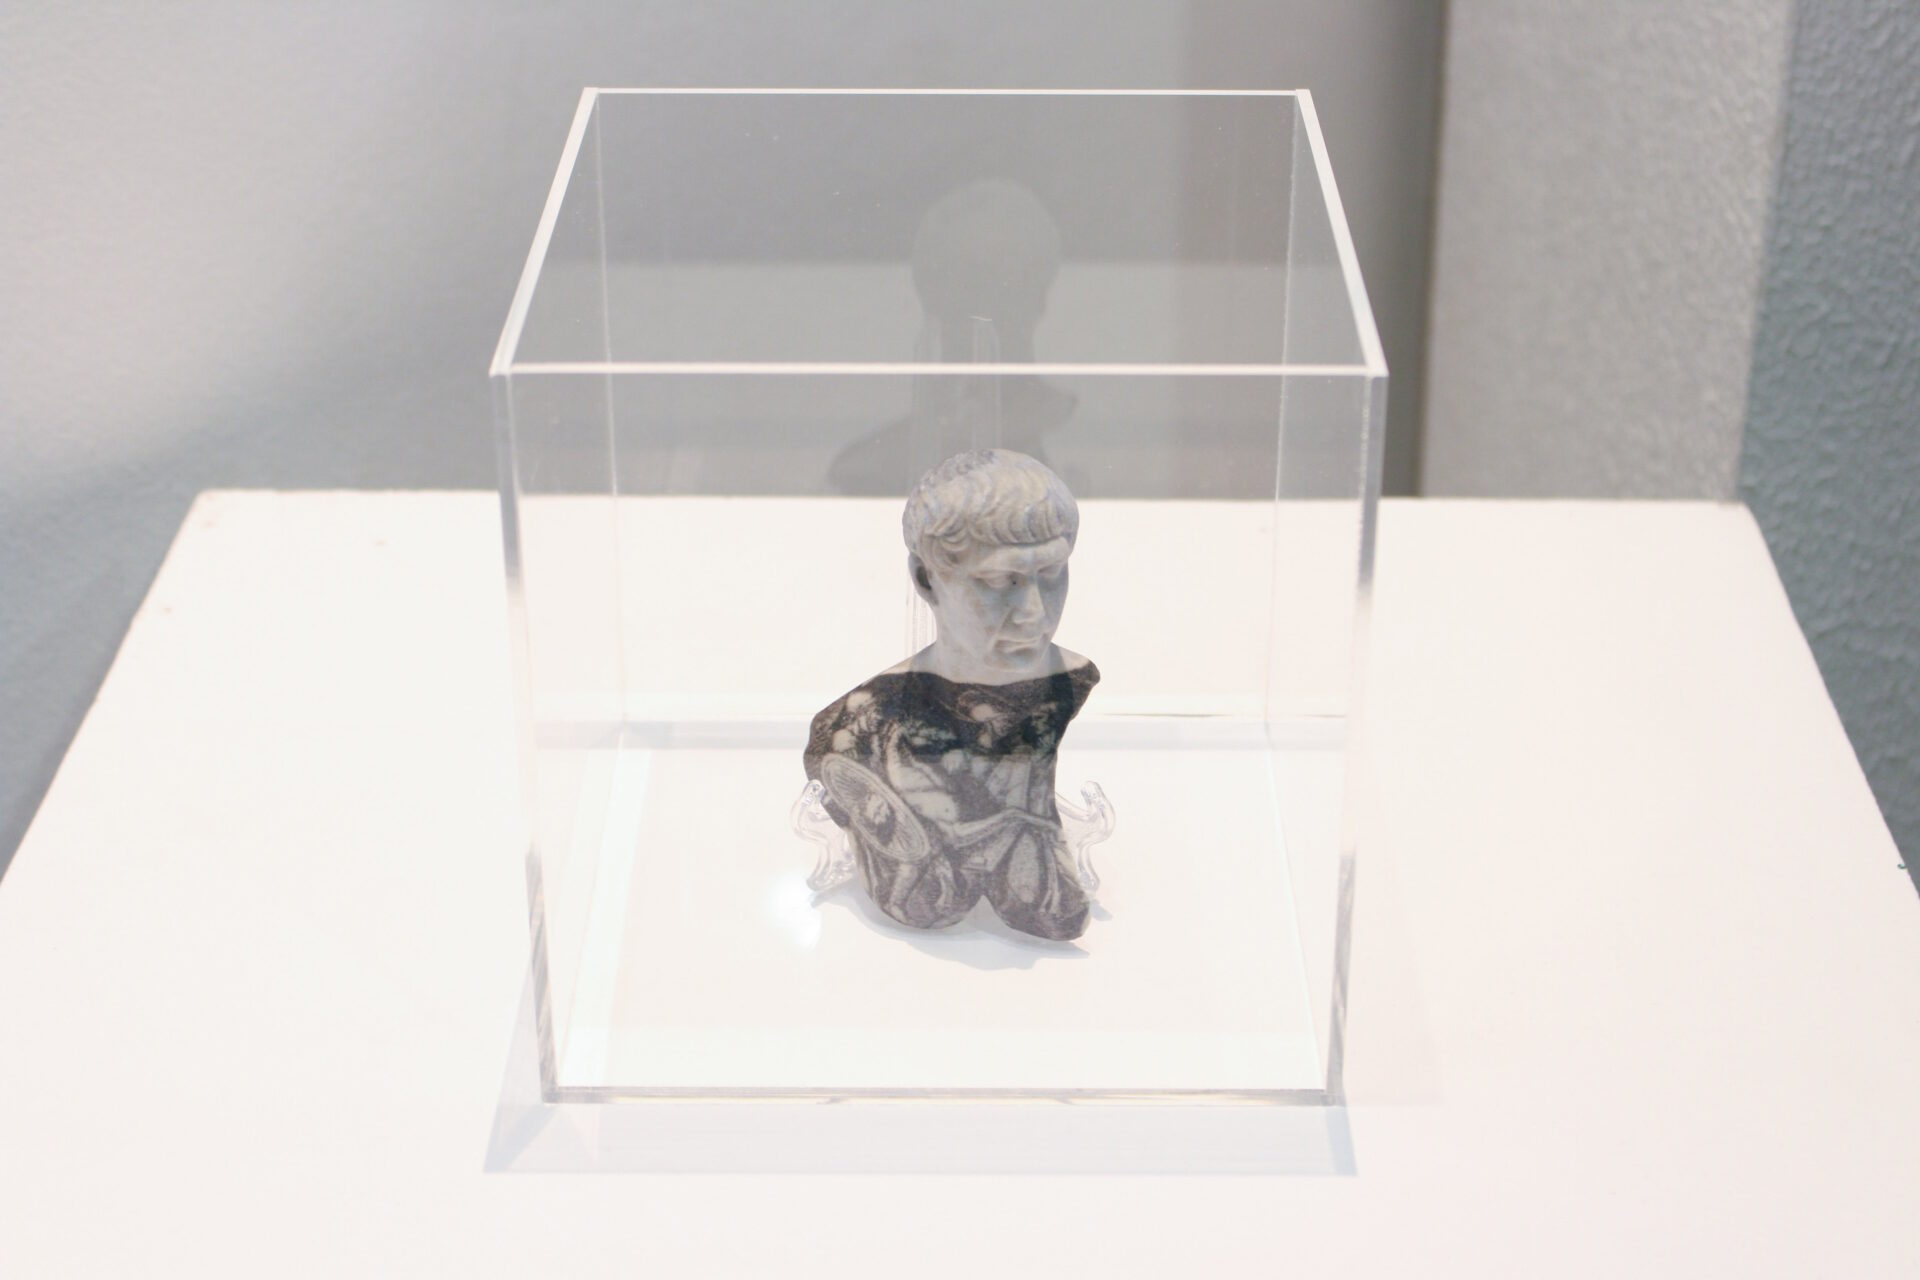 Grayscale 3D print of Trajan with a fighting scene placed inside a clear Perspex box on top of a white plinth.